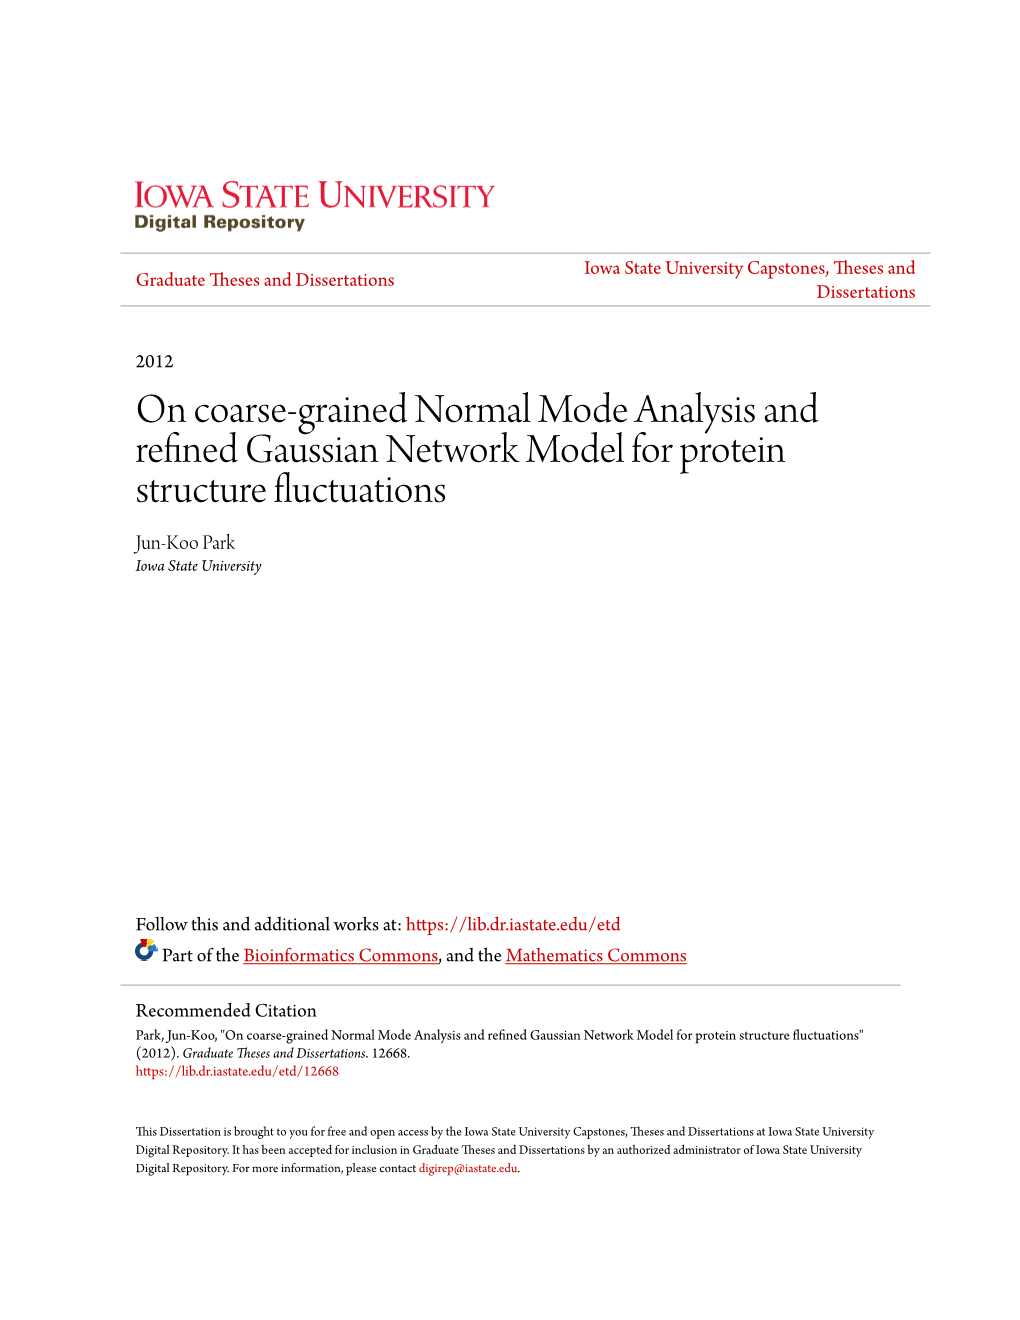 On Coarse-Grained Normal Mode Analysis and Refined Gaussian Network Model for Protein Structure Fluctuations" (2012)